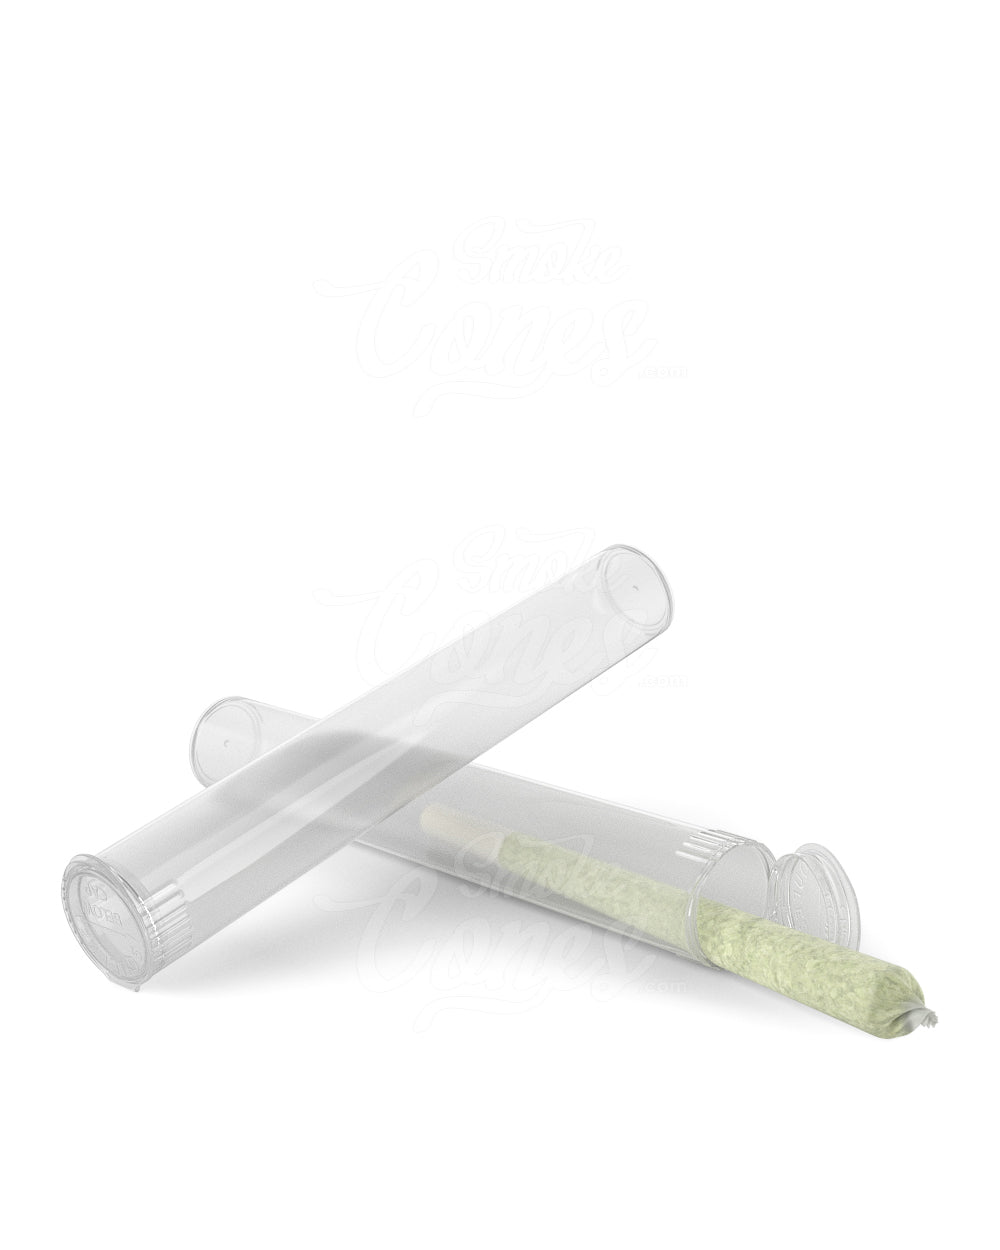 116mm Pre-Roll Tubes - Child Resistant Pop Top - 1400 Qty.